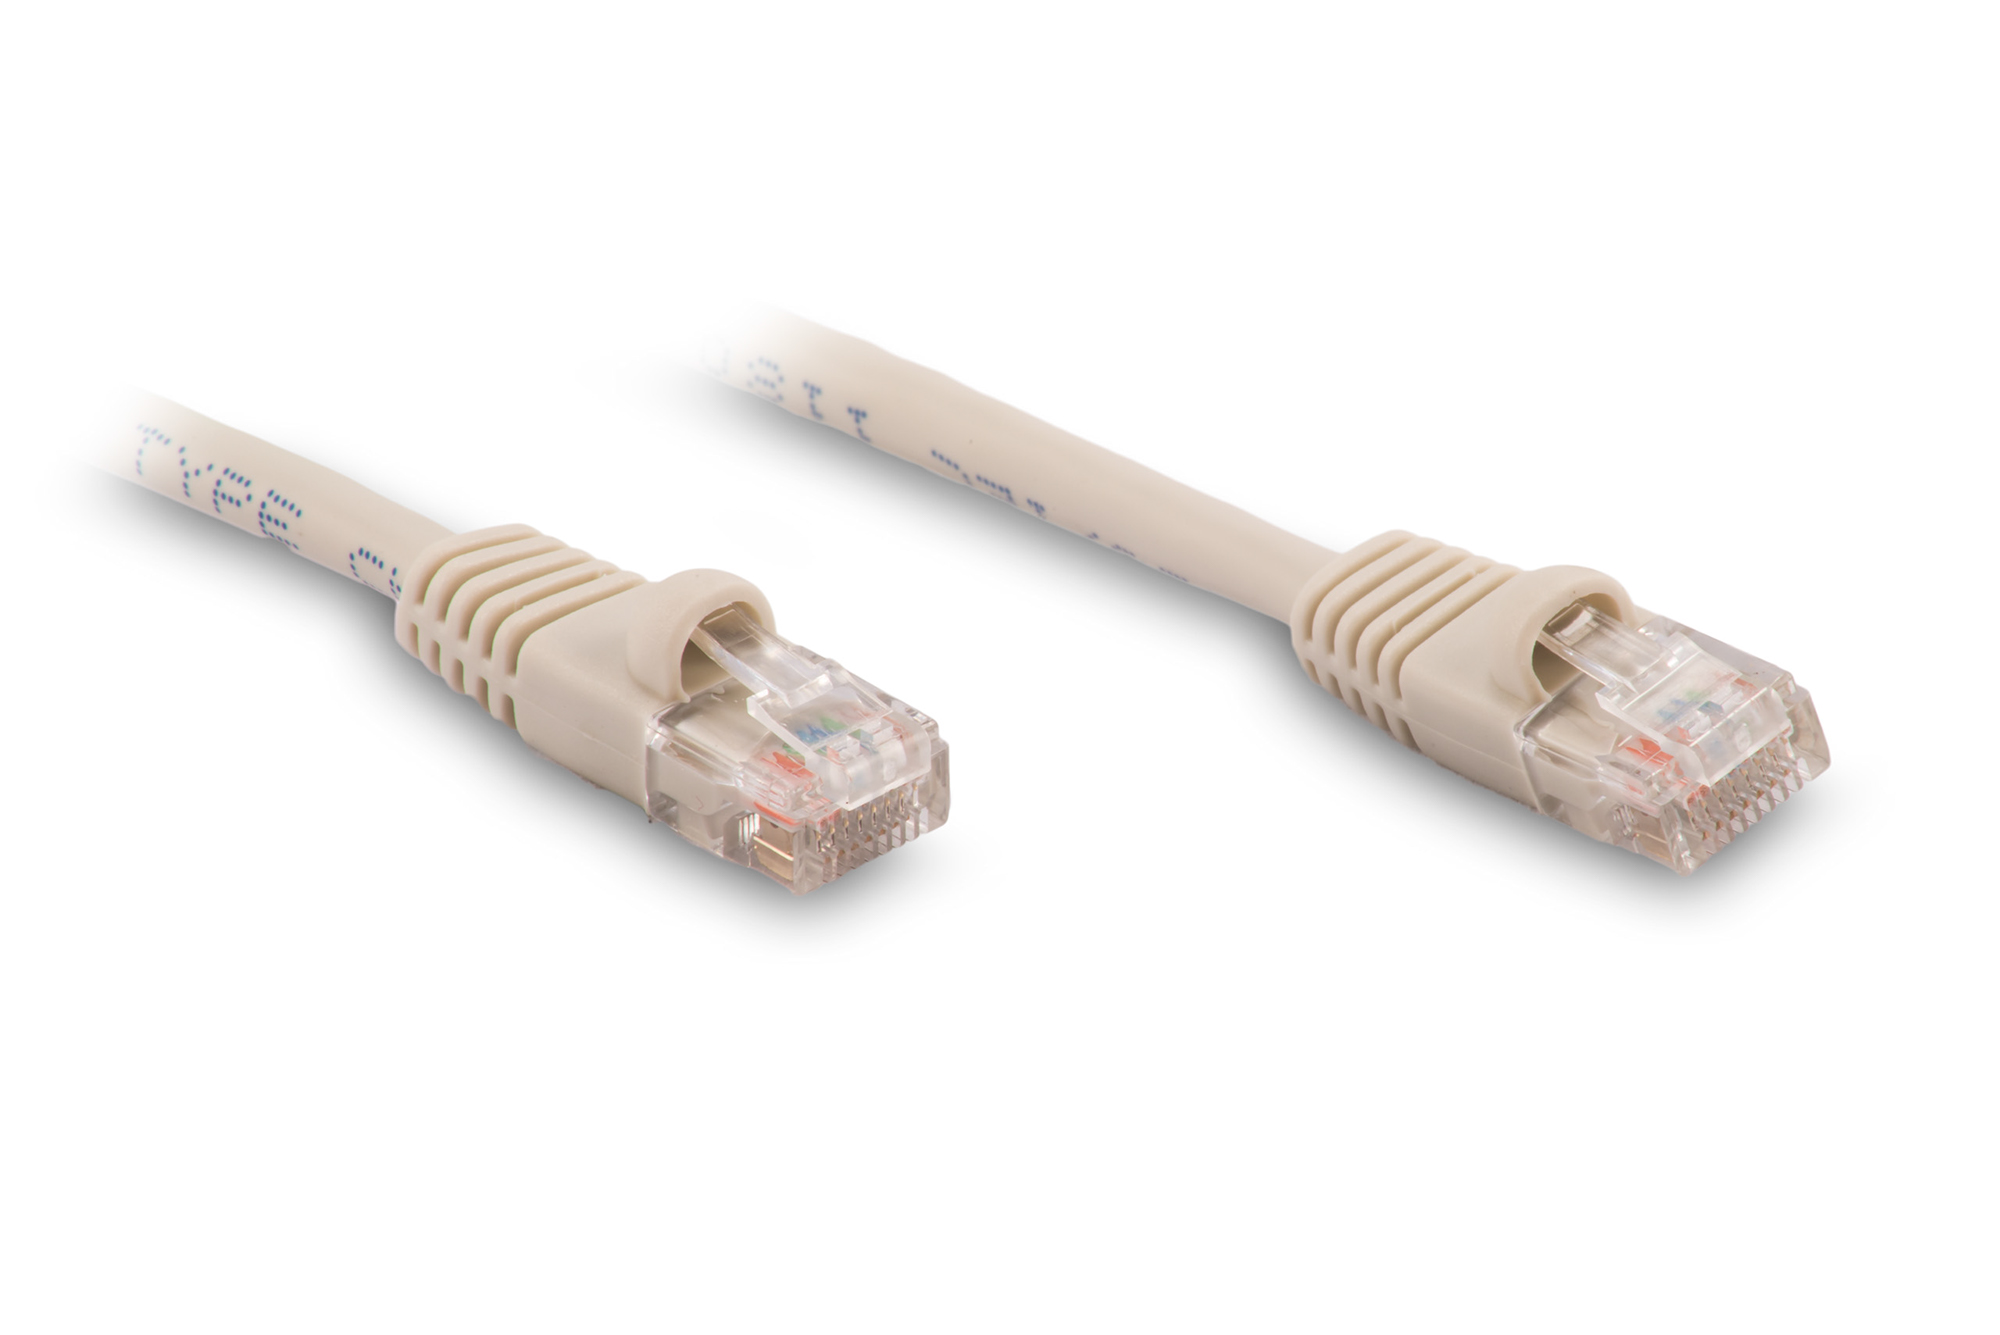 50ft Cat5e Ethernet Patch Cable - Gray Color - Snagless Boot